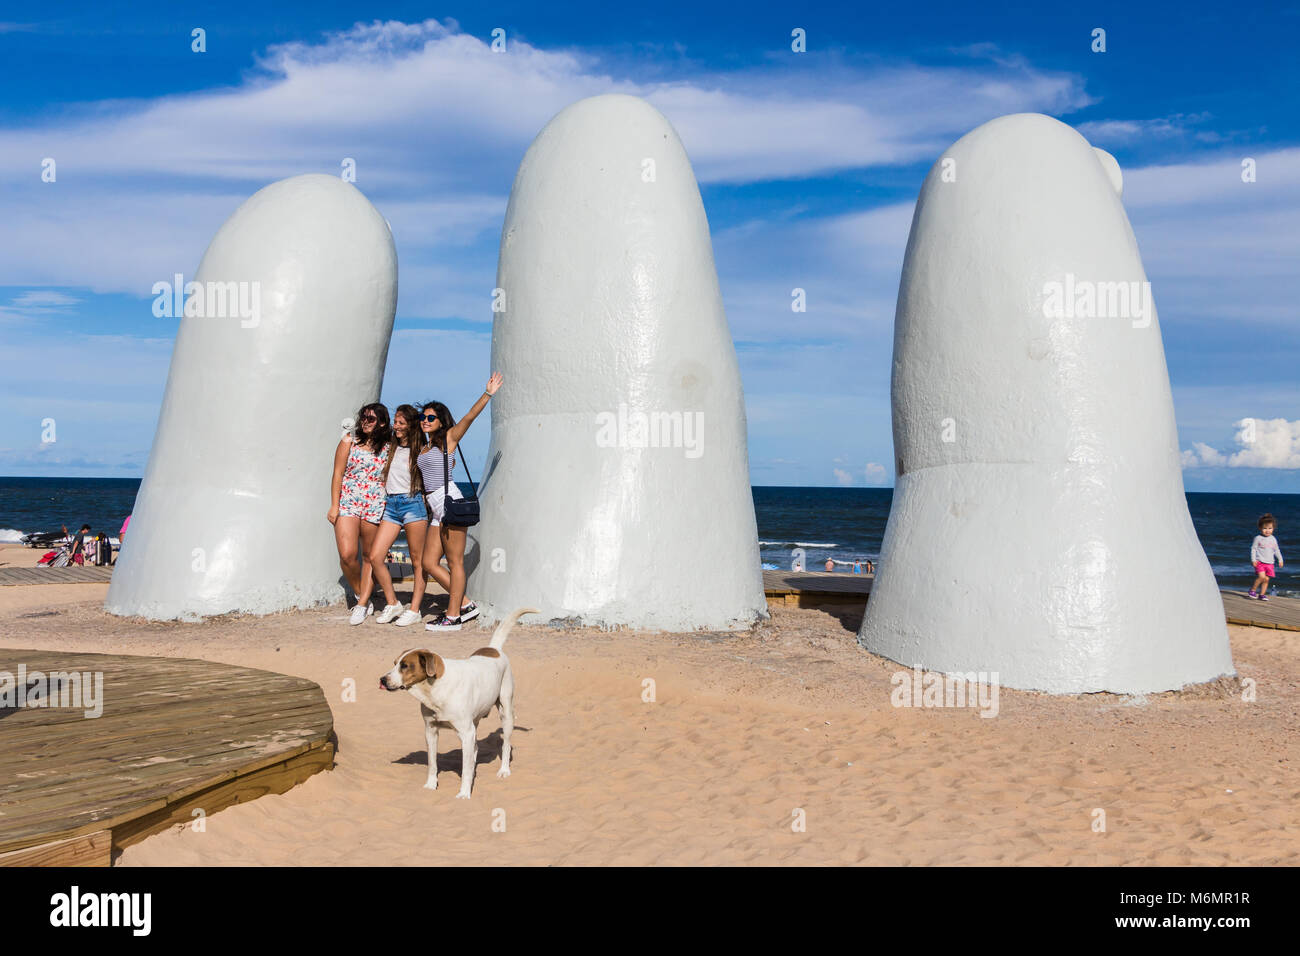 Punta Del Este, Uruguay - February 28th, 2018: Three young women taking photos and sefies at La Mano, the sculpture made by Mario Irarrazabal, Playa L Stock Photo